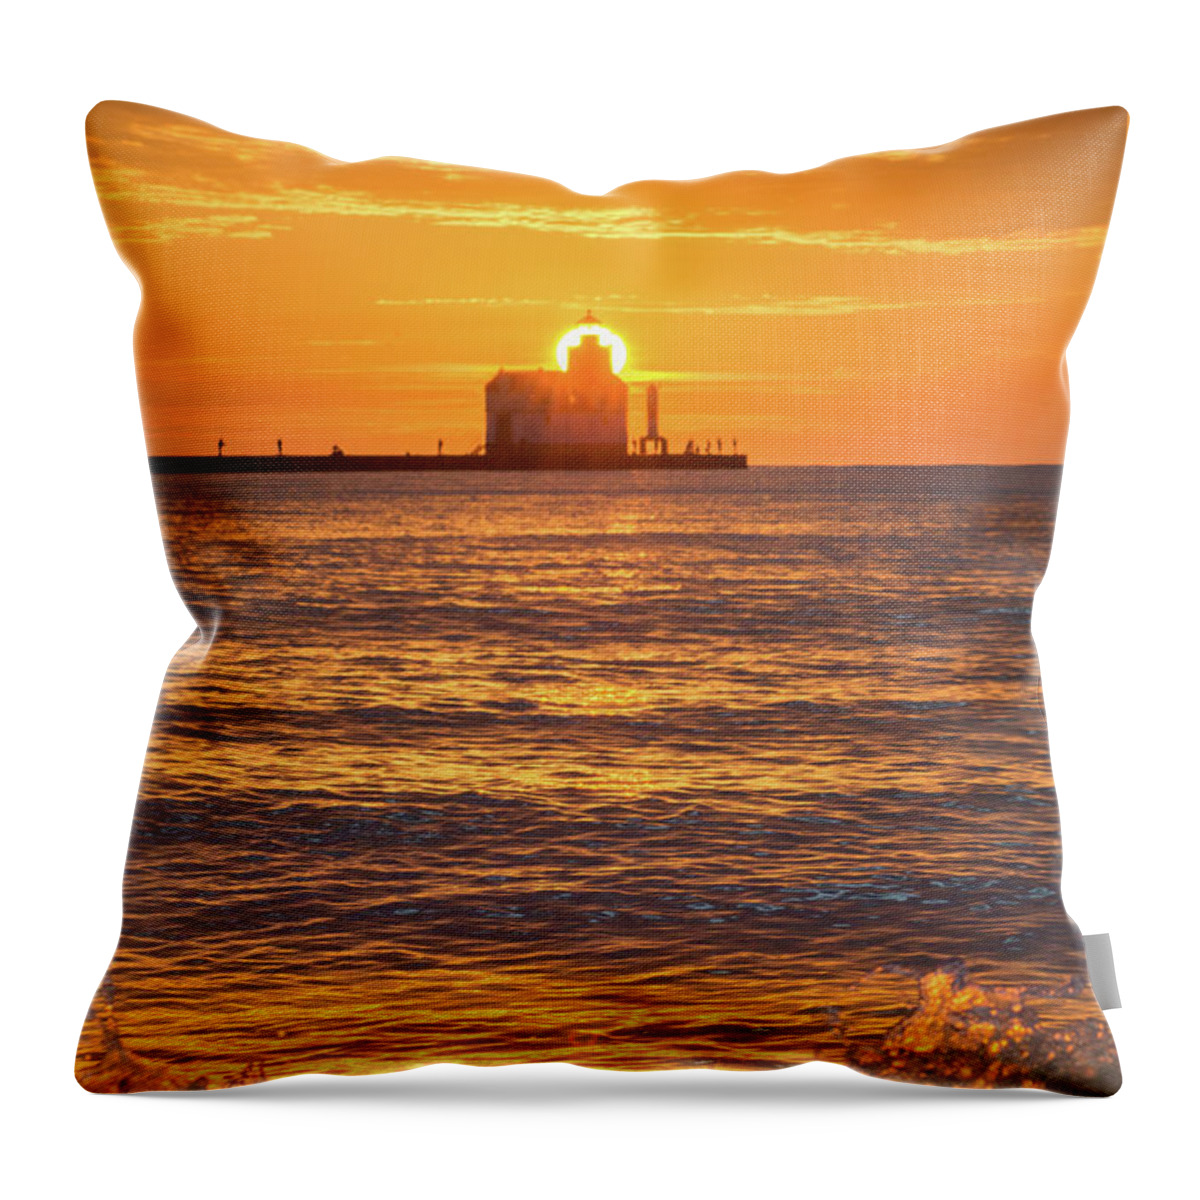 Lighthouse Throw Pillow featuring the photograph Splash of Light by Bill Pevlor